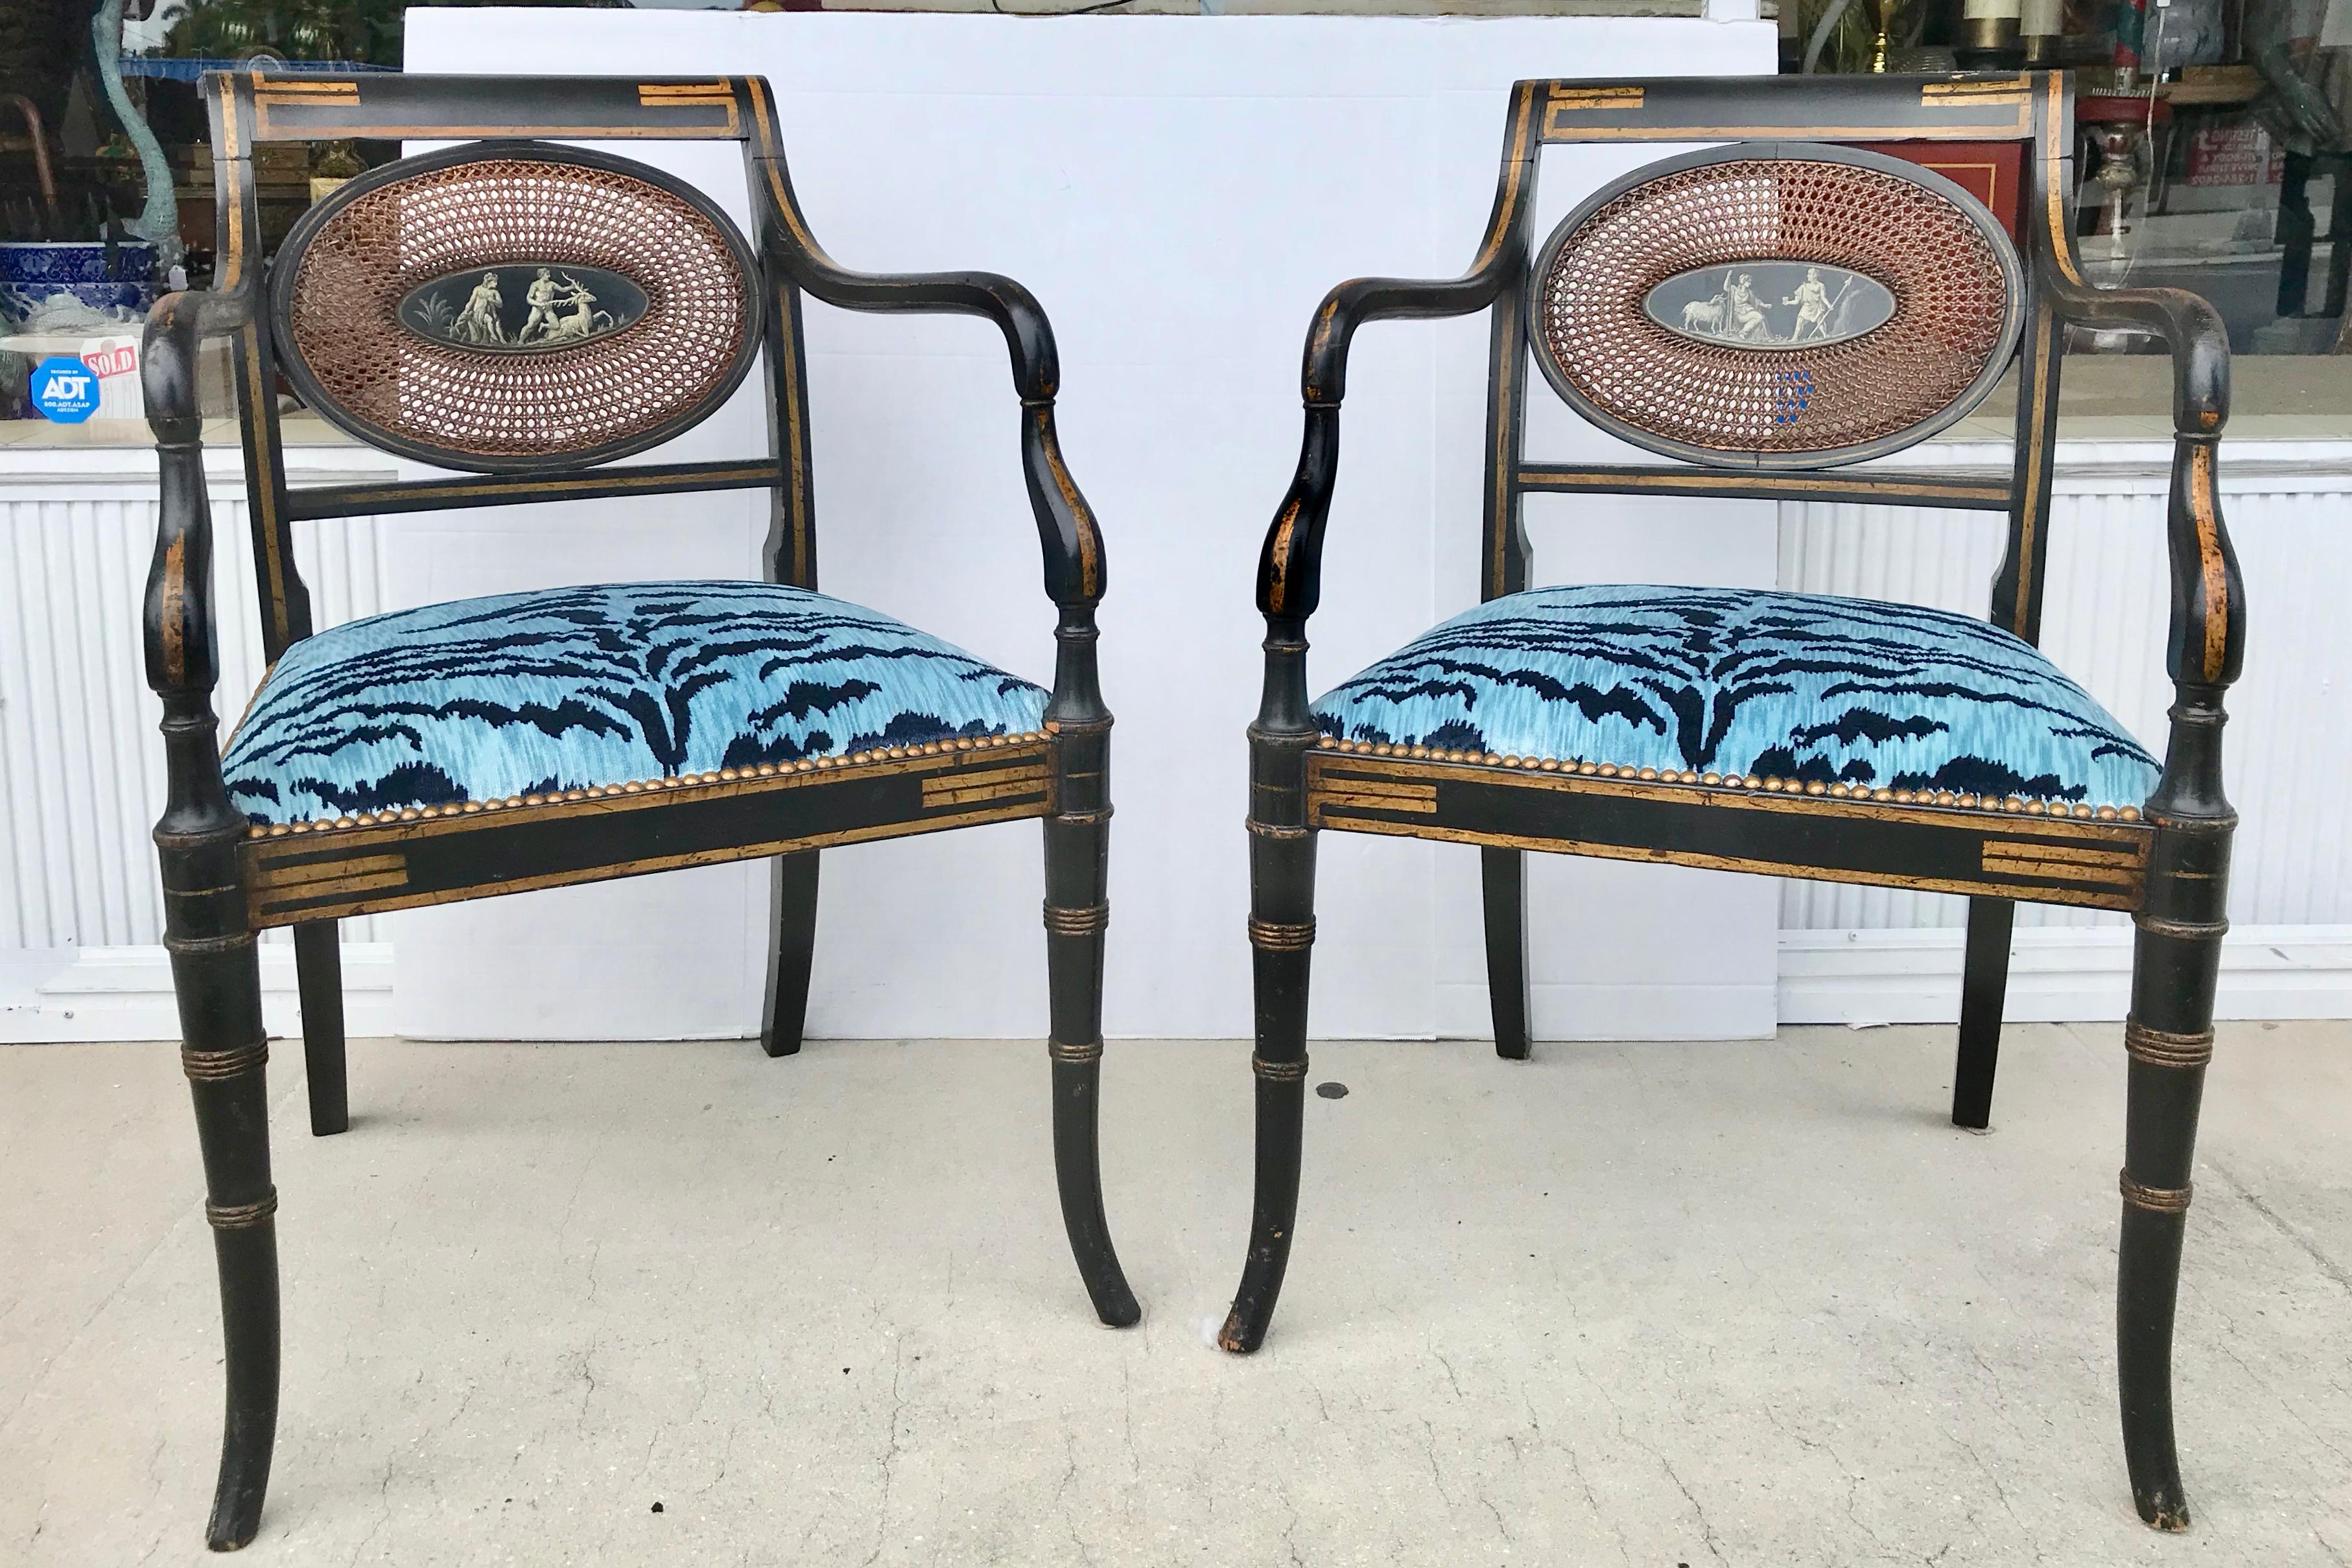 A Classic and fine pair of 19th century chairs fashioned with neoclassic figures
adorning their back rests and appointed with fabulously eye-catching
Luigi Bevilacqua seats.